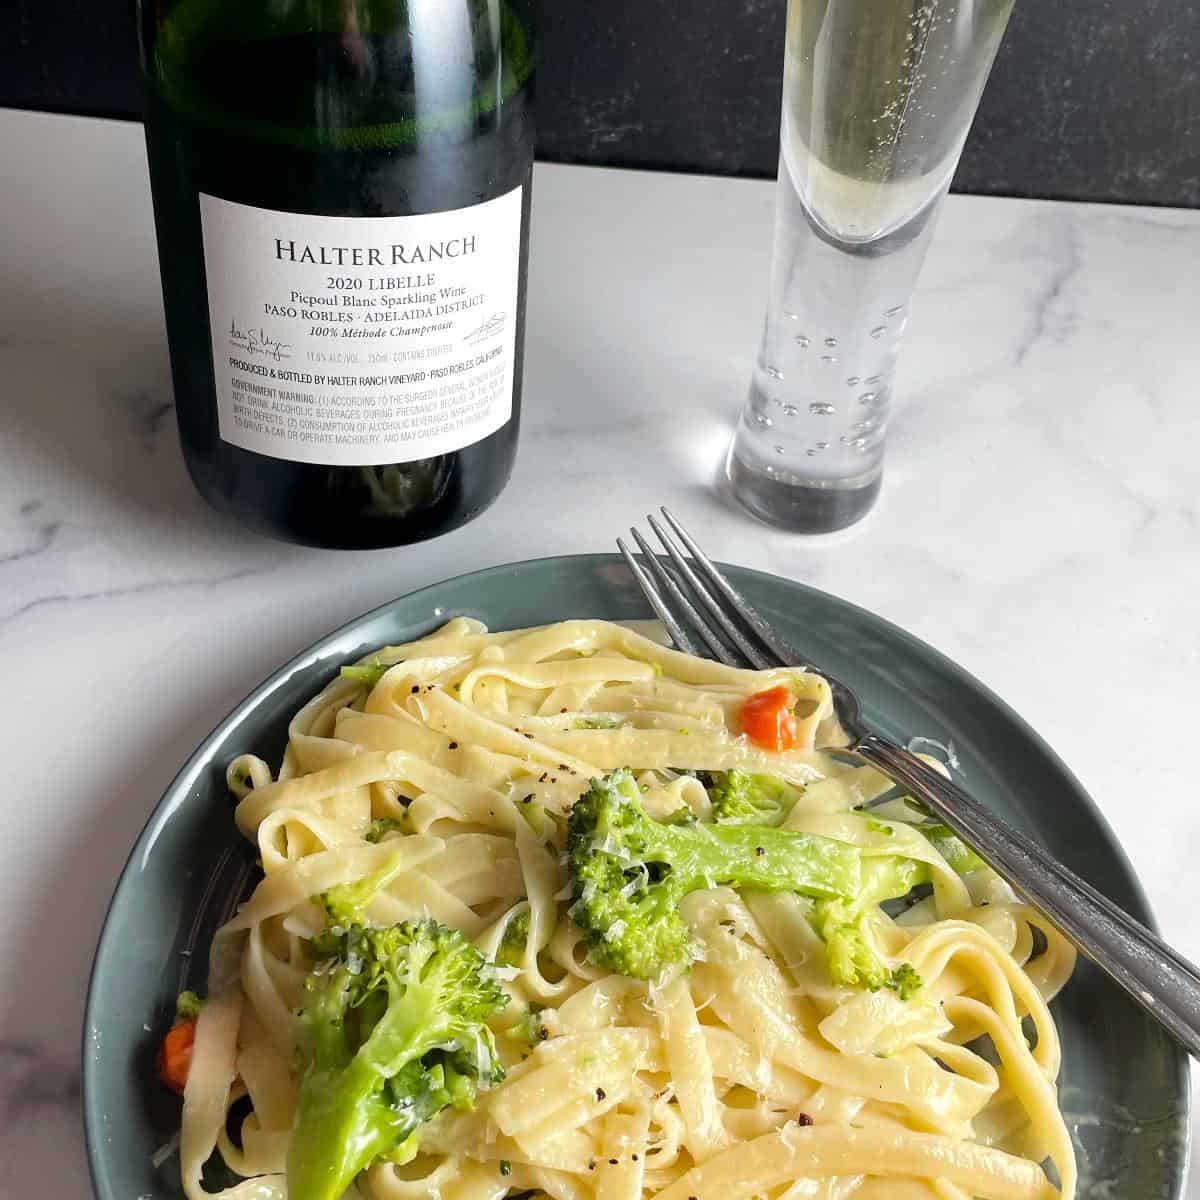 plate of fettuccine with a bottle and glass of Halter Ranch Libelle, a sparkling wine.